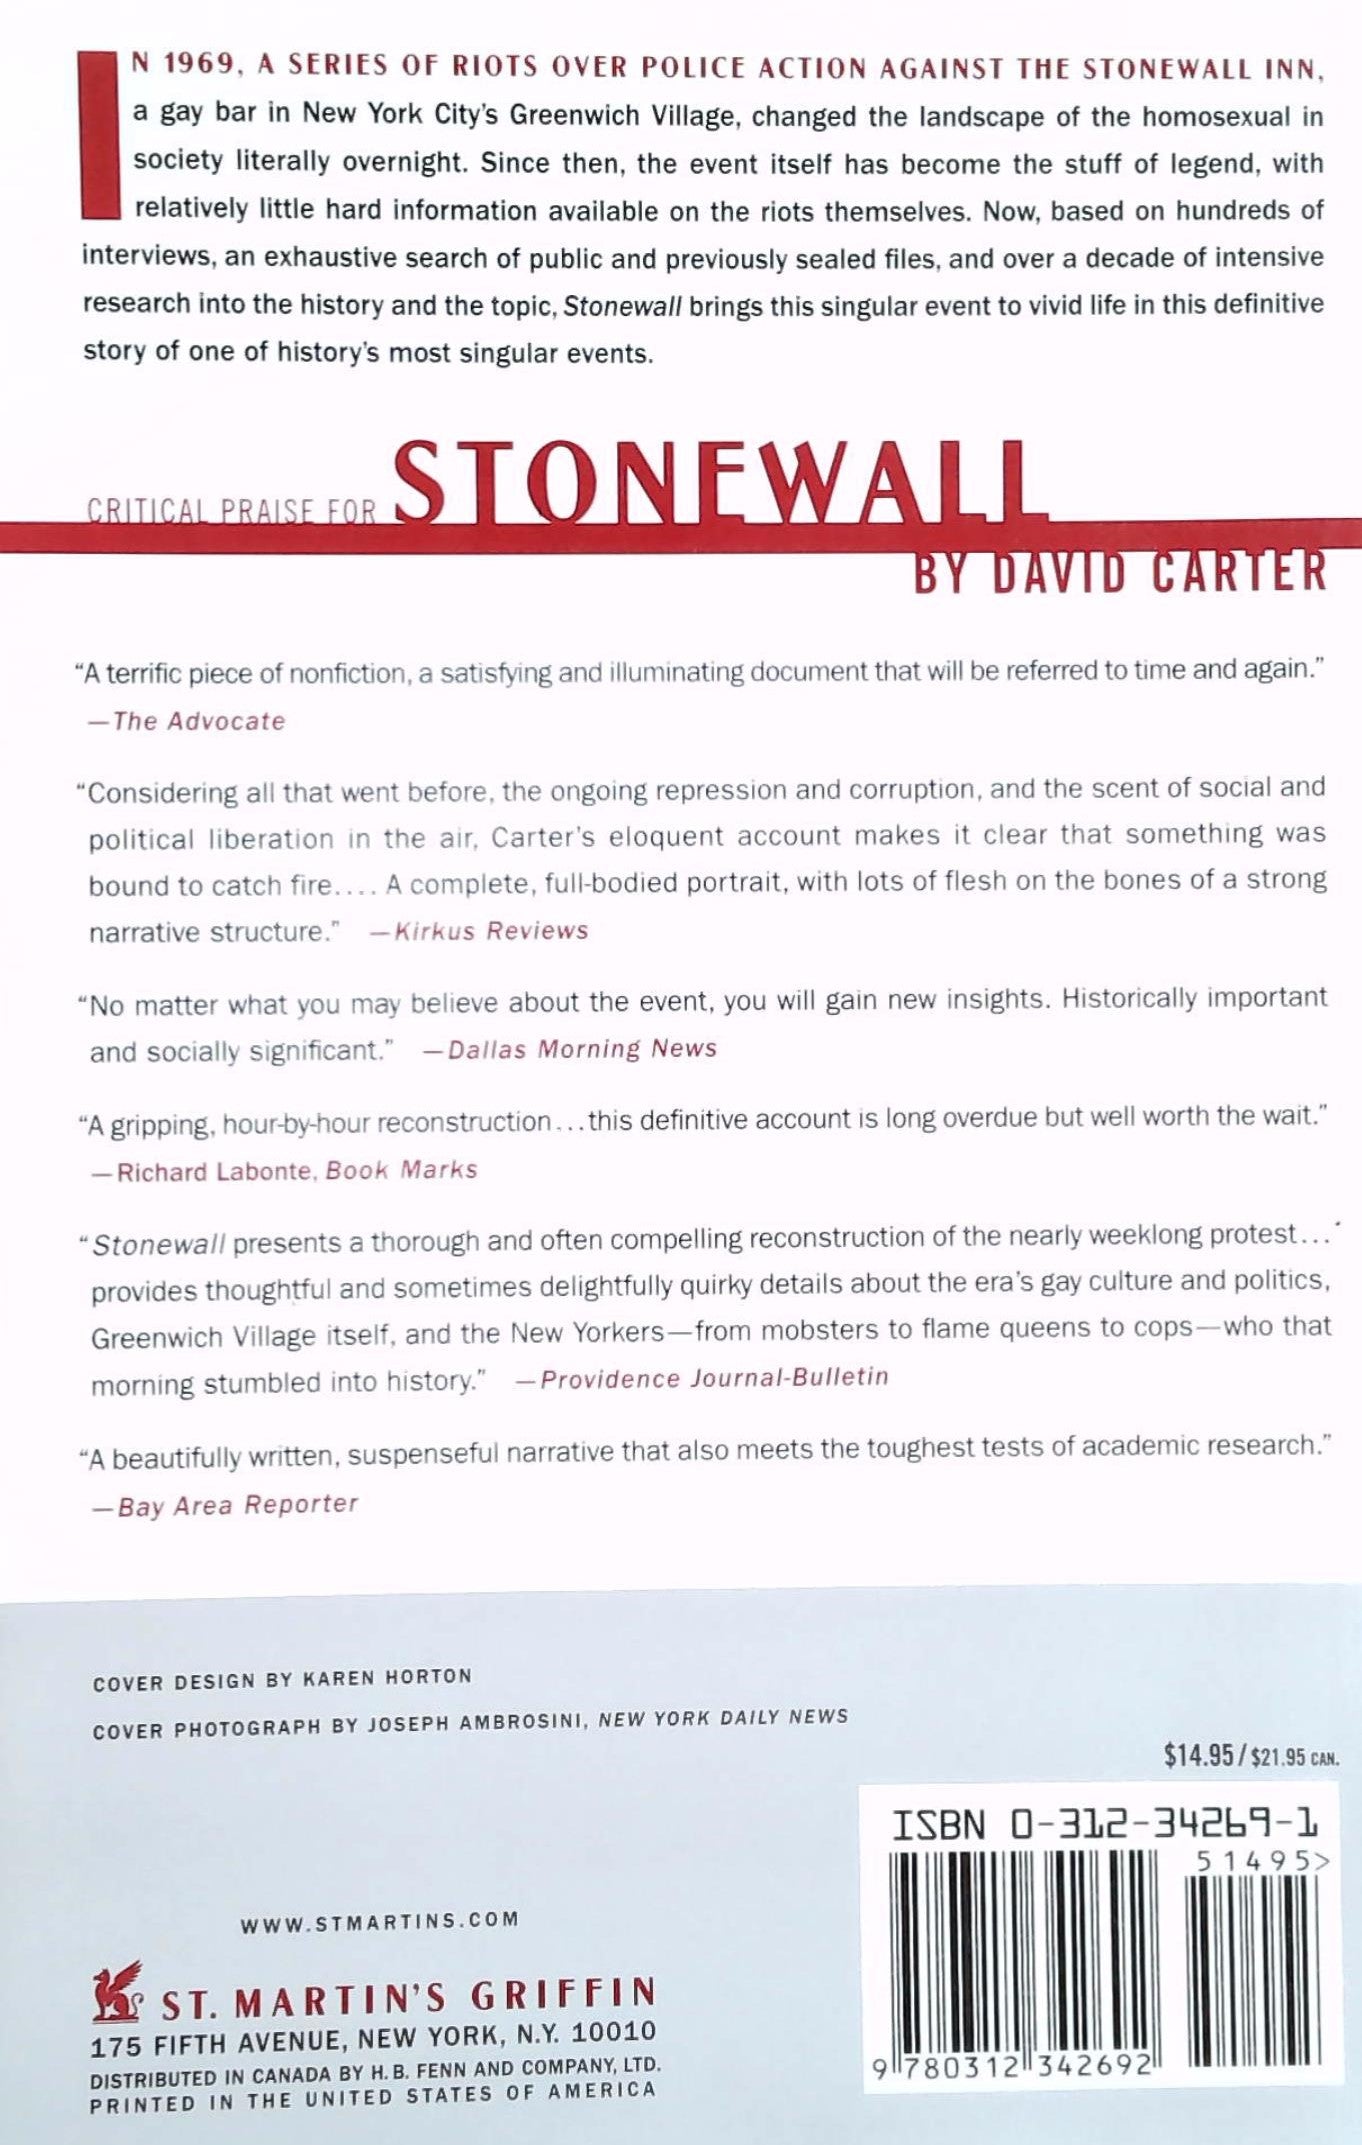 Stonewall : The Riots that Sparked the Gay Revolution (David Carter)